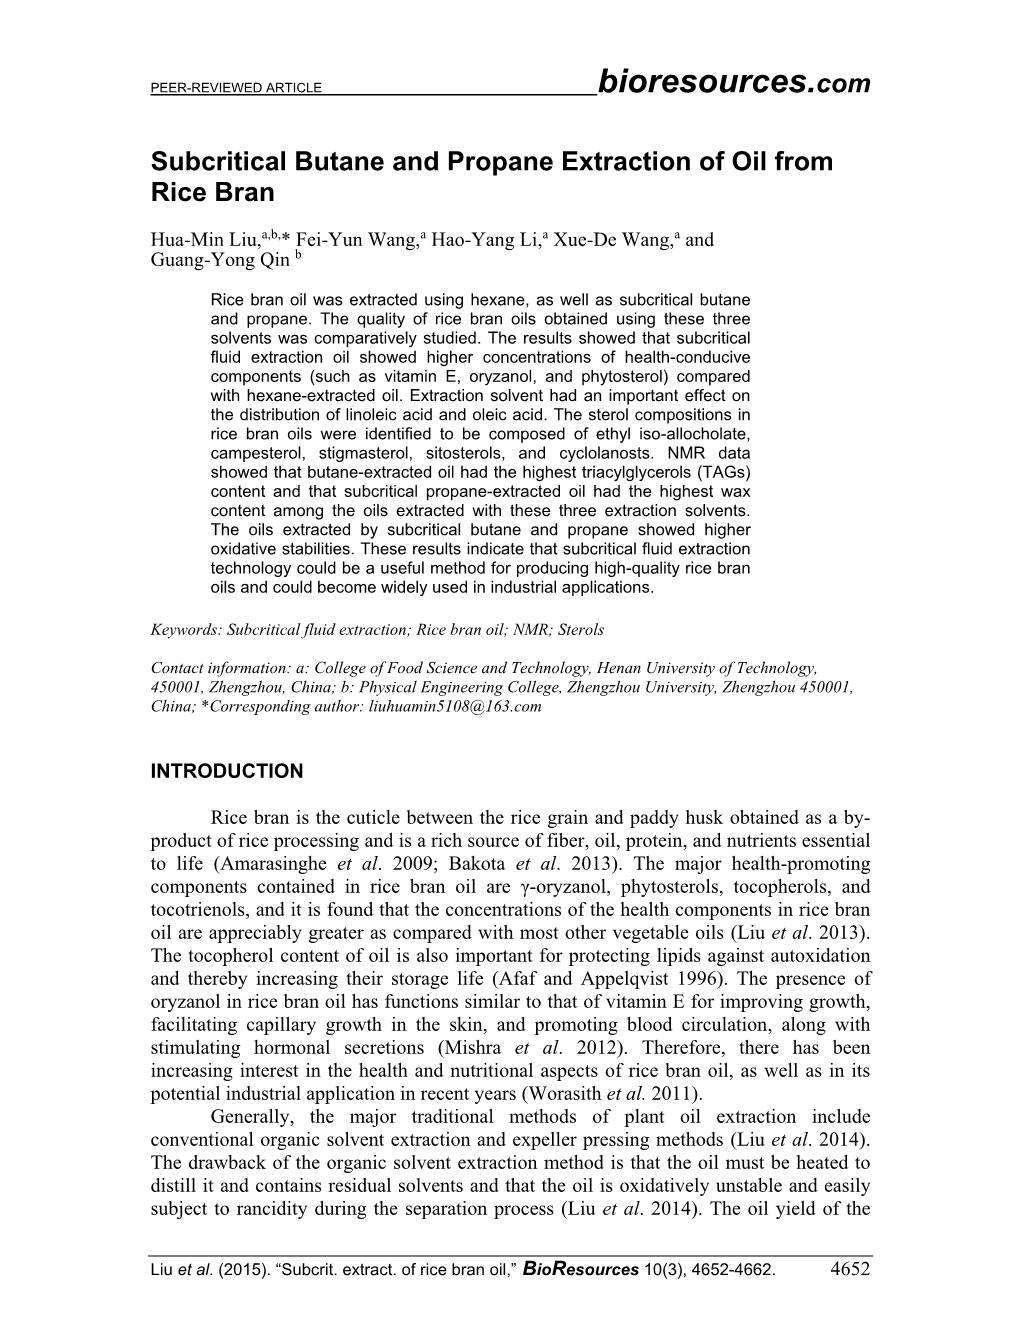 Subcritical Butane and Propane Extraction of Oil from Rice Bran